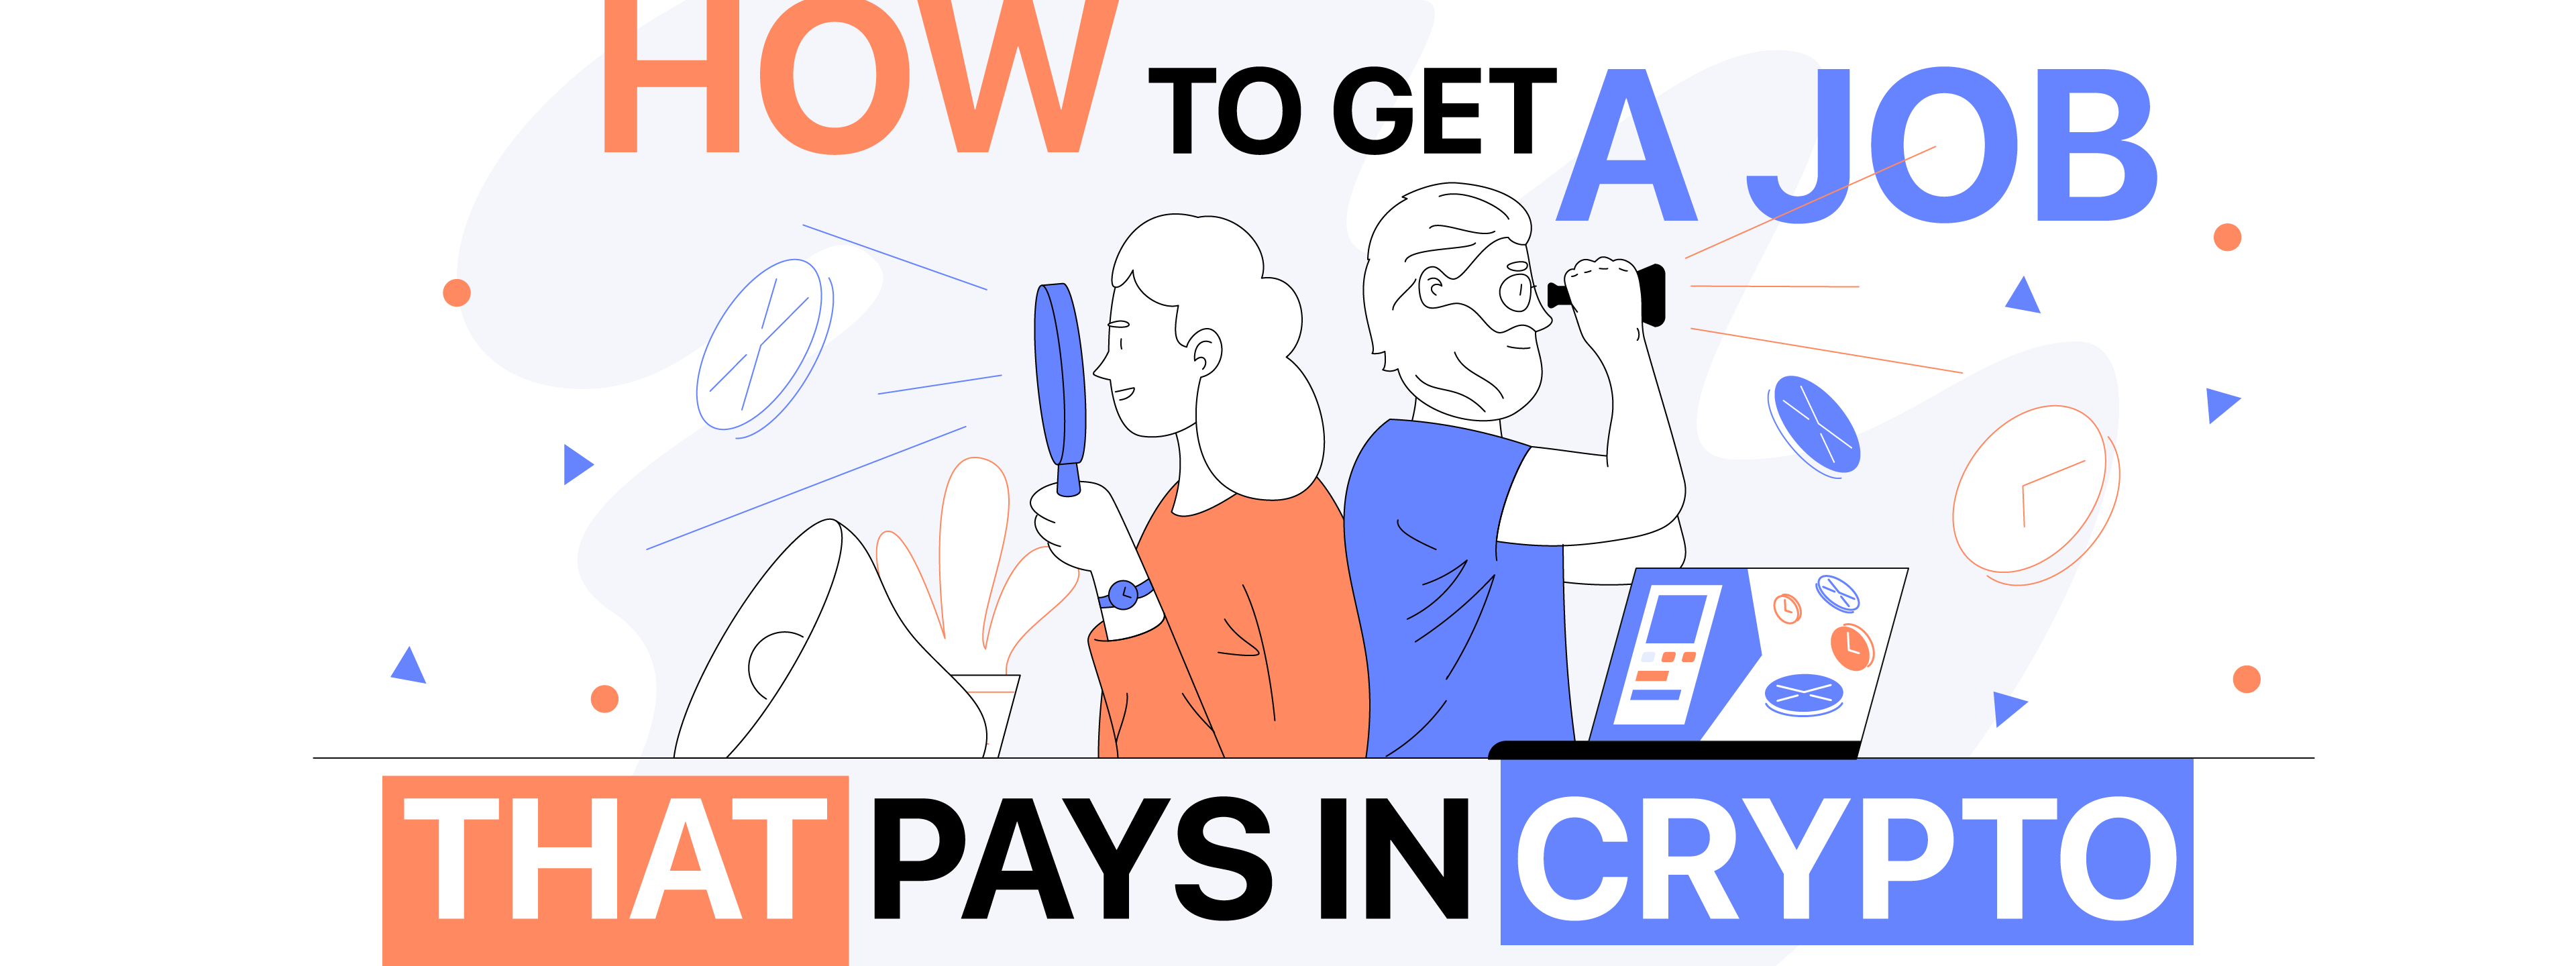 how to get a job within cryptocurrency